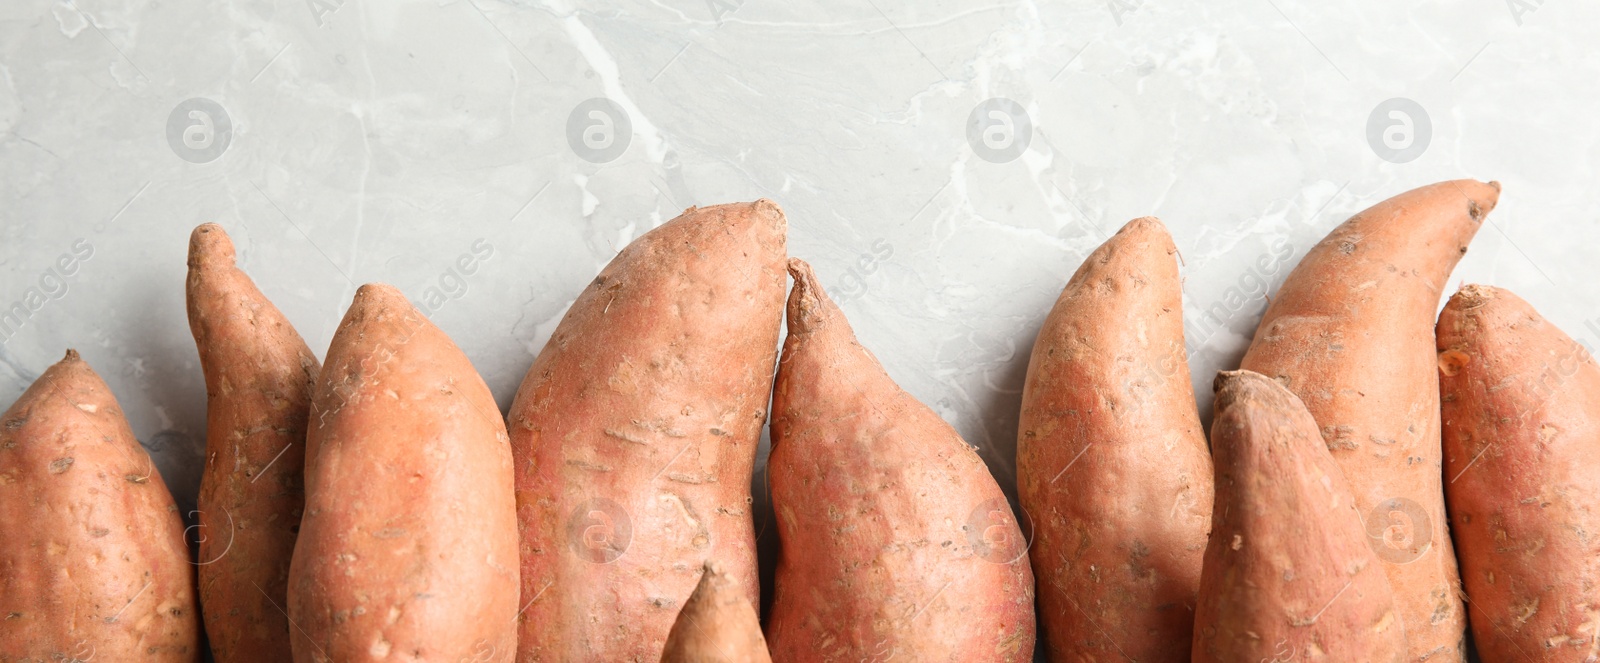 Image of Many sweet potatoes on light grey marble background. Banner design